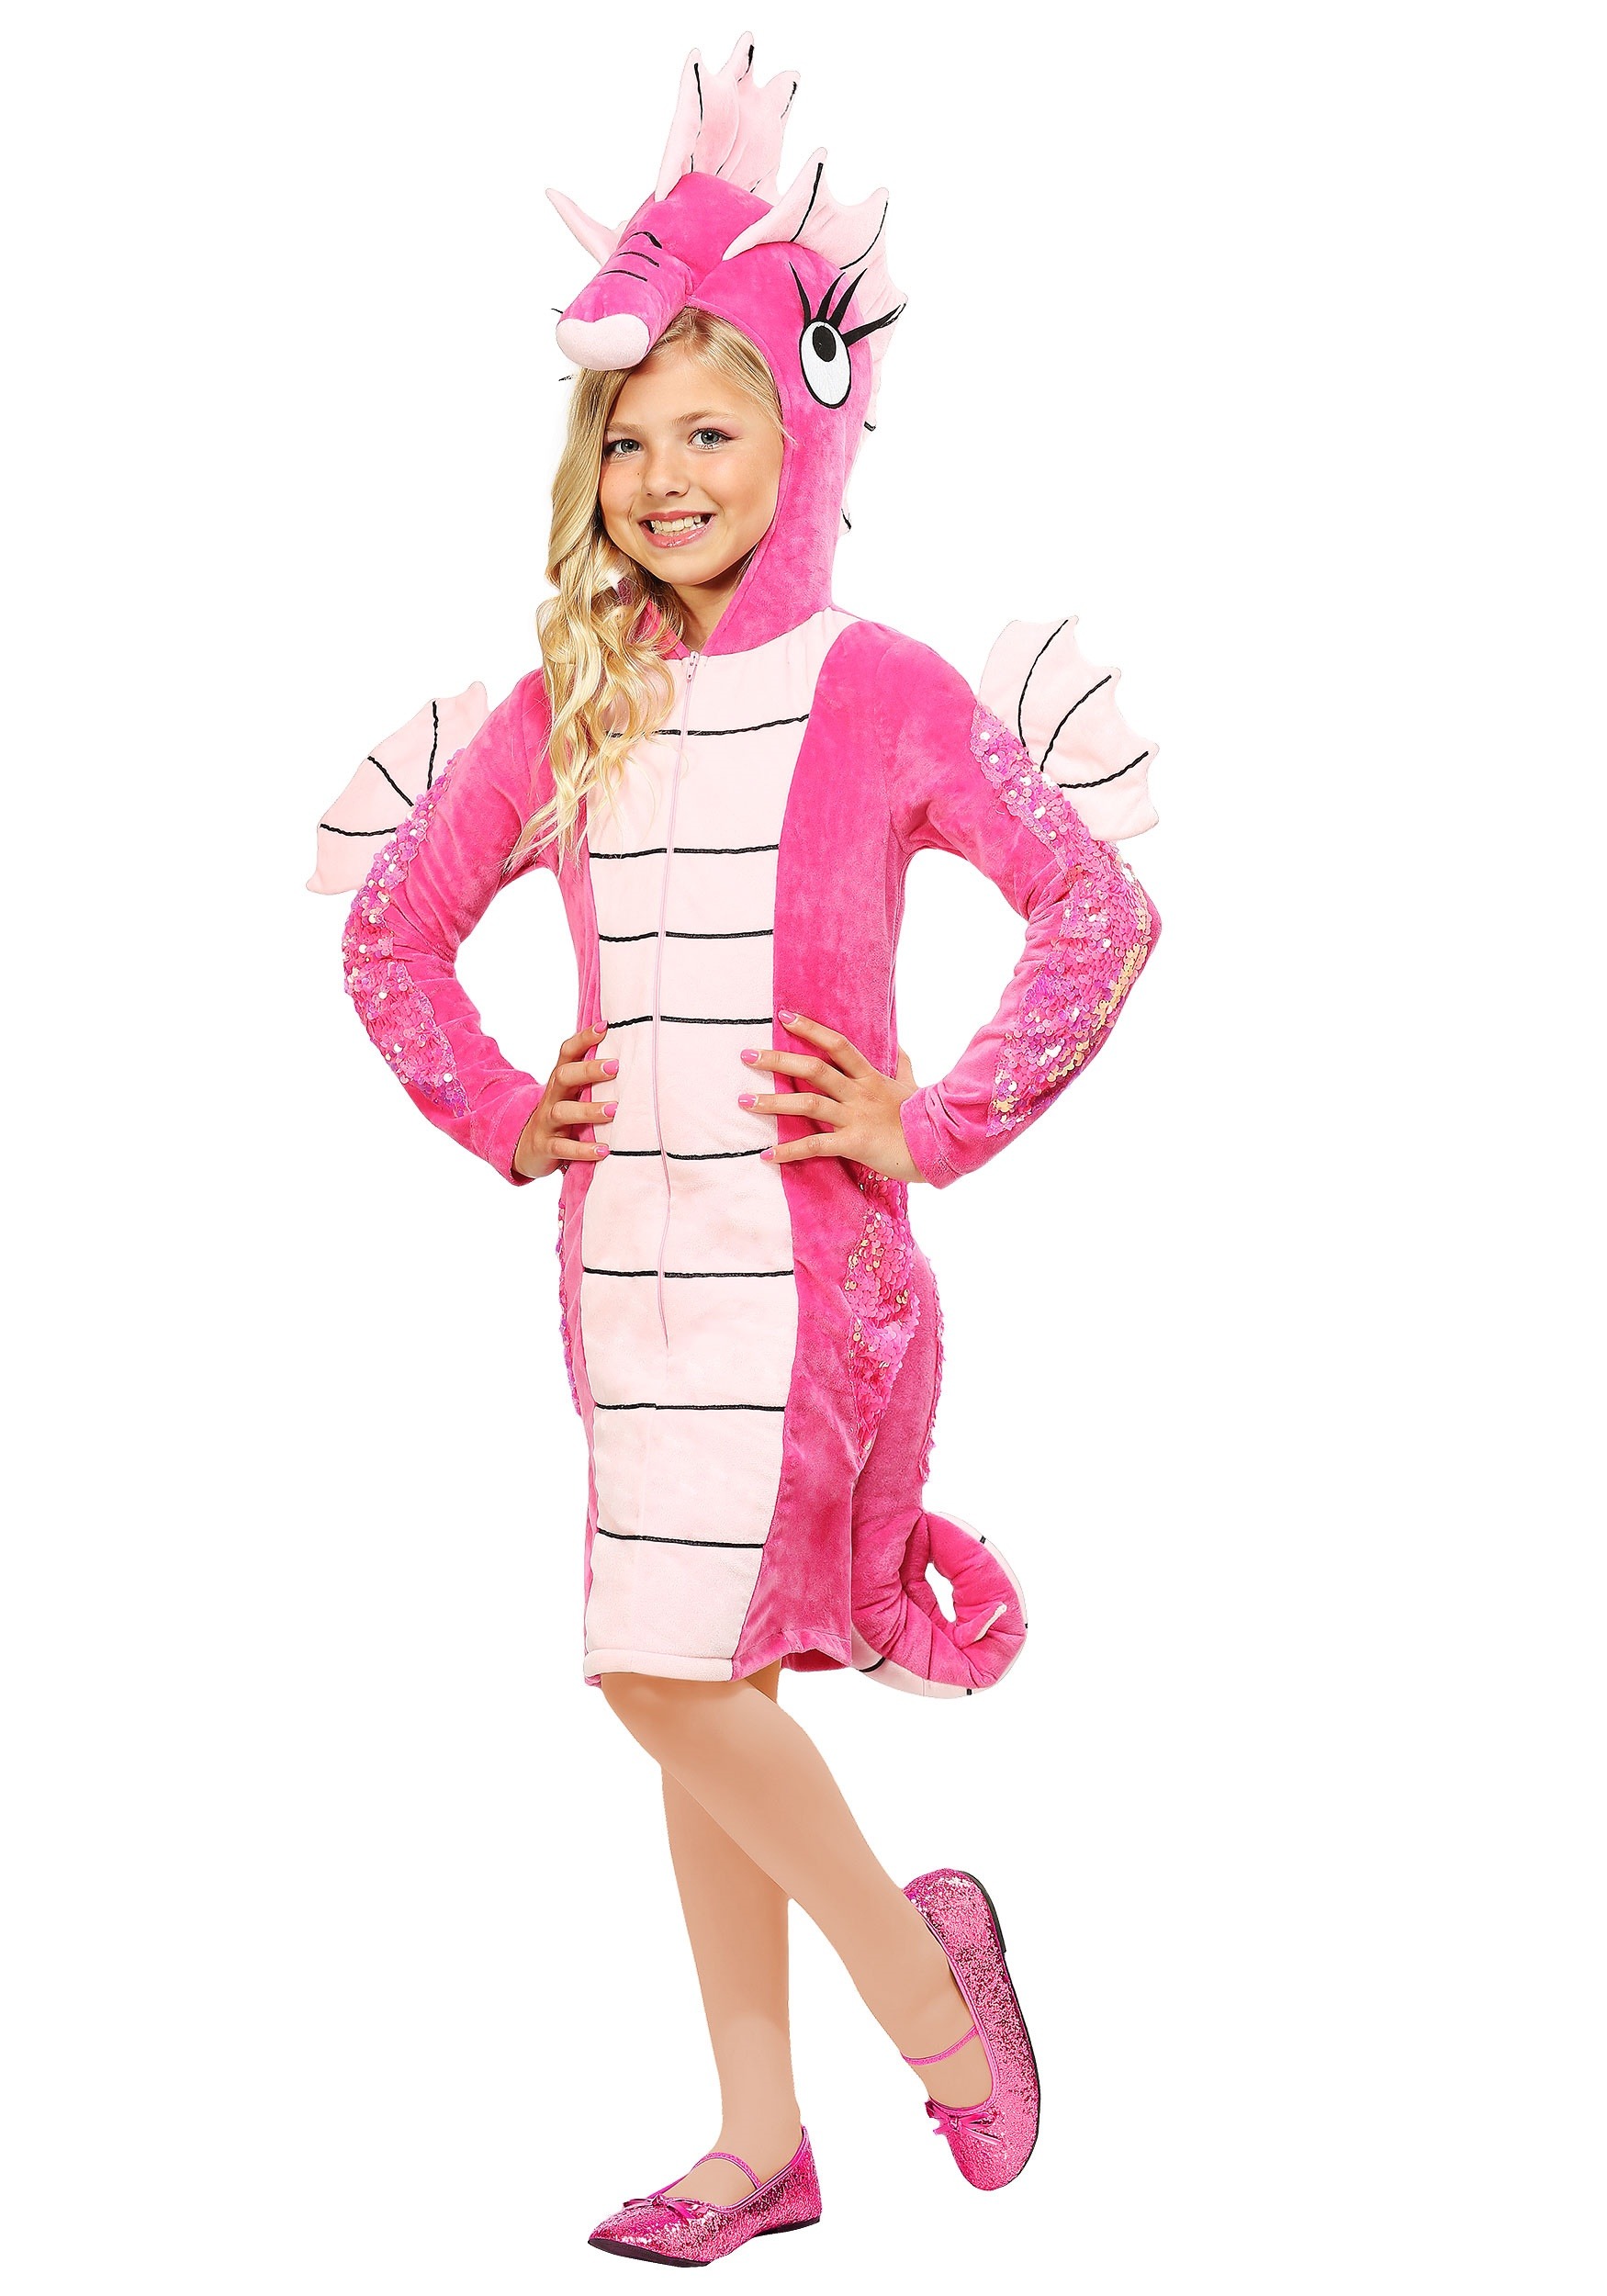 Photos - Fancy Dress Sea Horse FUN Costumes Seahorse Costume for Girls Pink 